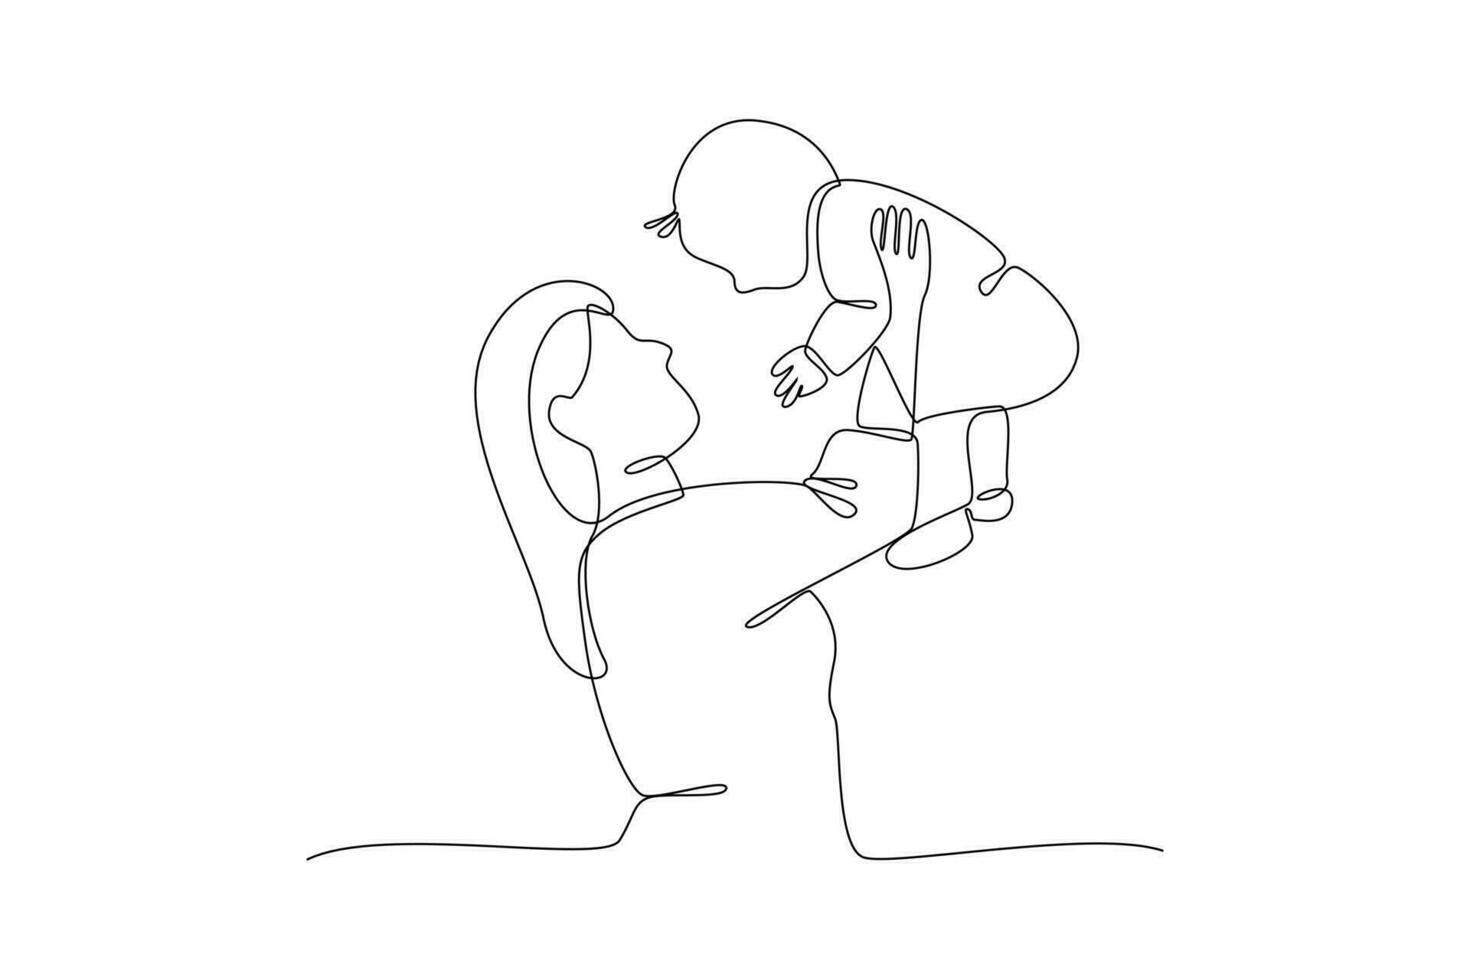 Continuous one line drawing Parents with babies. Family maternity concept. Doodle vector illustration.